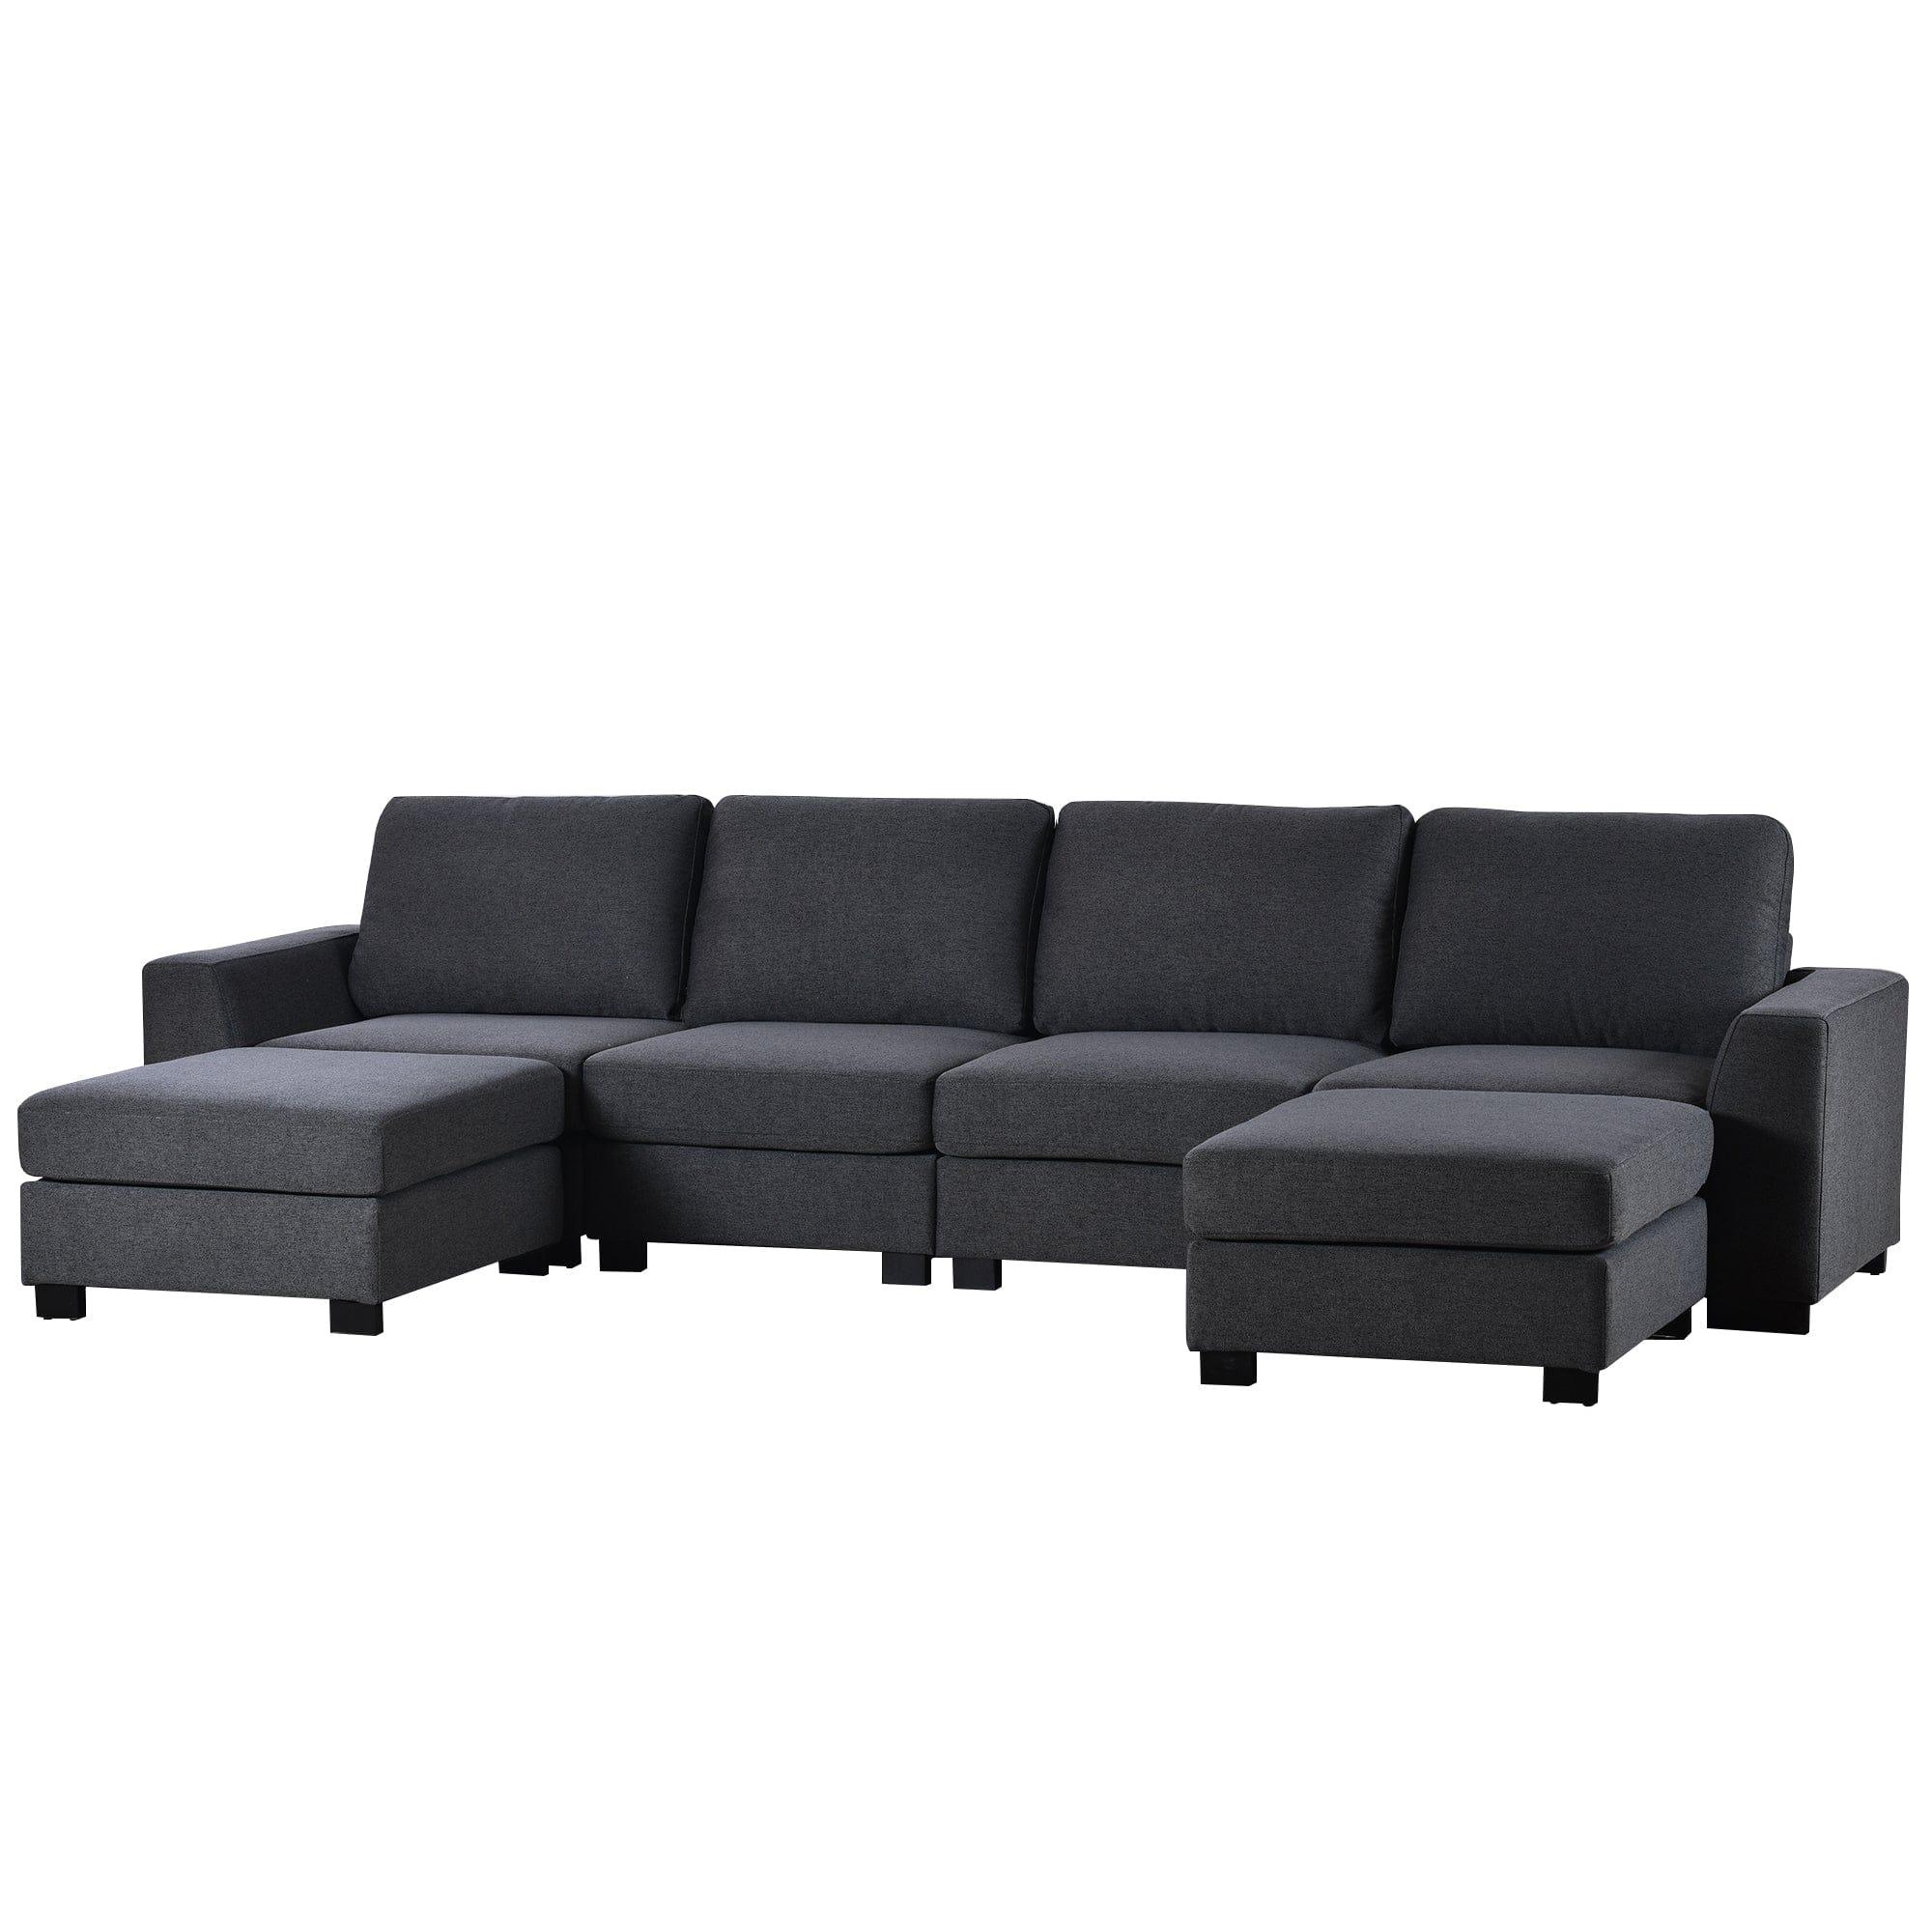 Shop U_STYLE 3 Pieces U shaped Sofa with Removable Ottomans Mademoiselle Home Decor